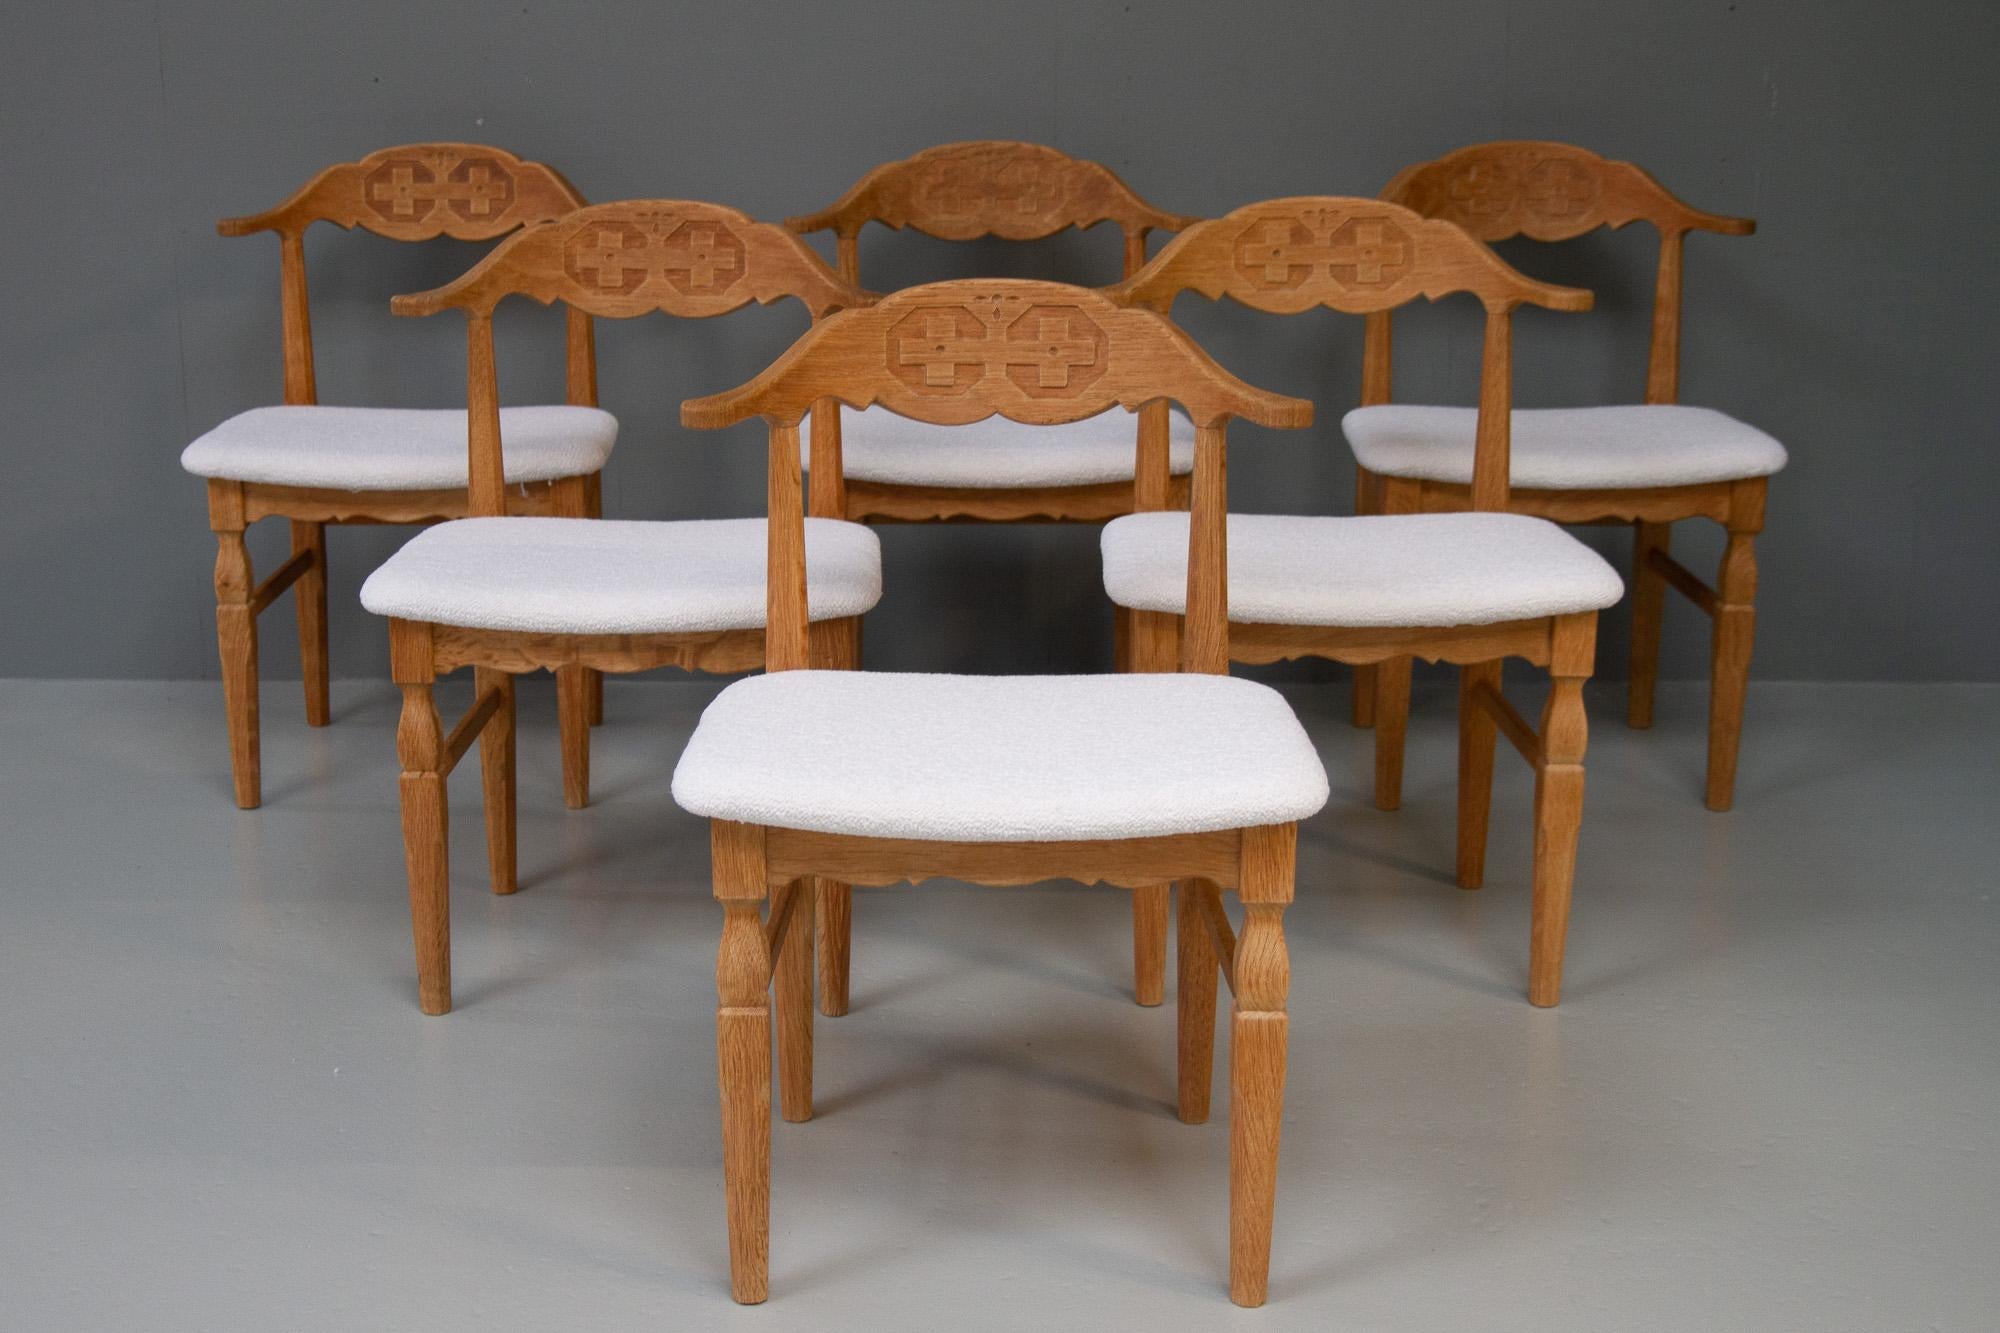 Vintage Danish Chairs in Oak and Bouclé by Henning Kjærnulf 1960s. Set of 6.
Set of six Danish Modern dining chairs designed by wellknown Danish architect Henning Kjærnulf and manufactured by EG Møbler, Denmark in the 1960s.
Henning Kjærnulf is